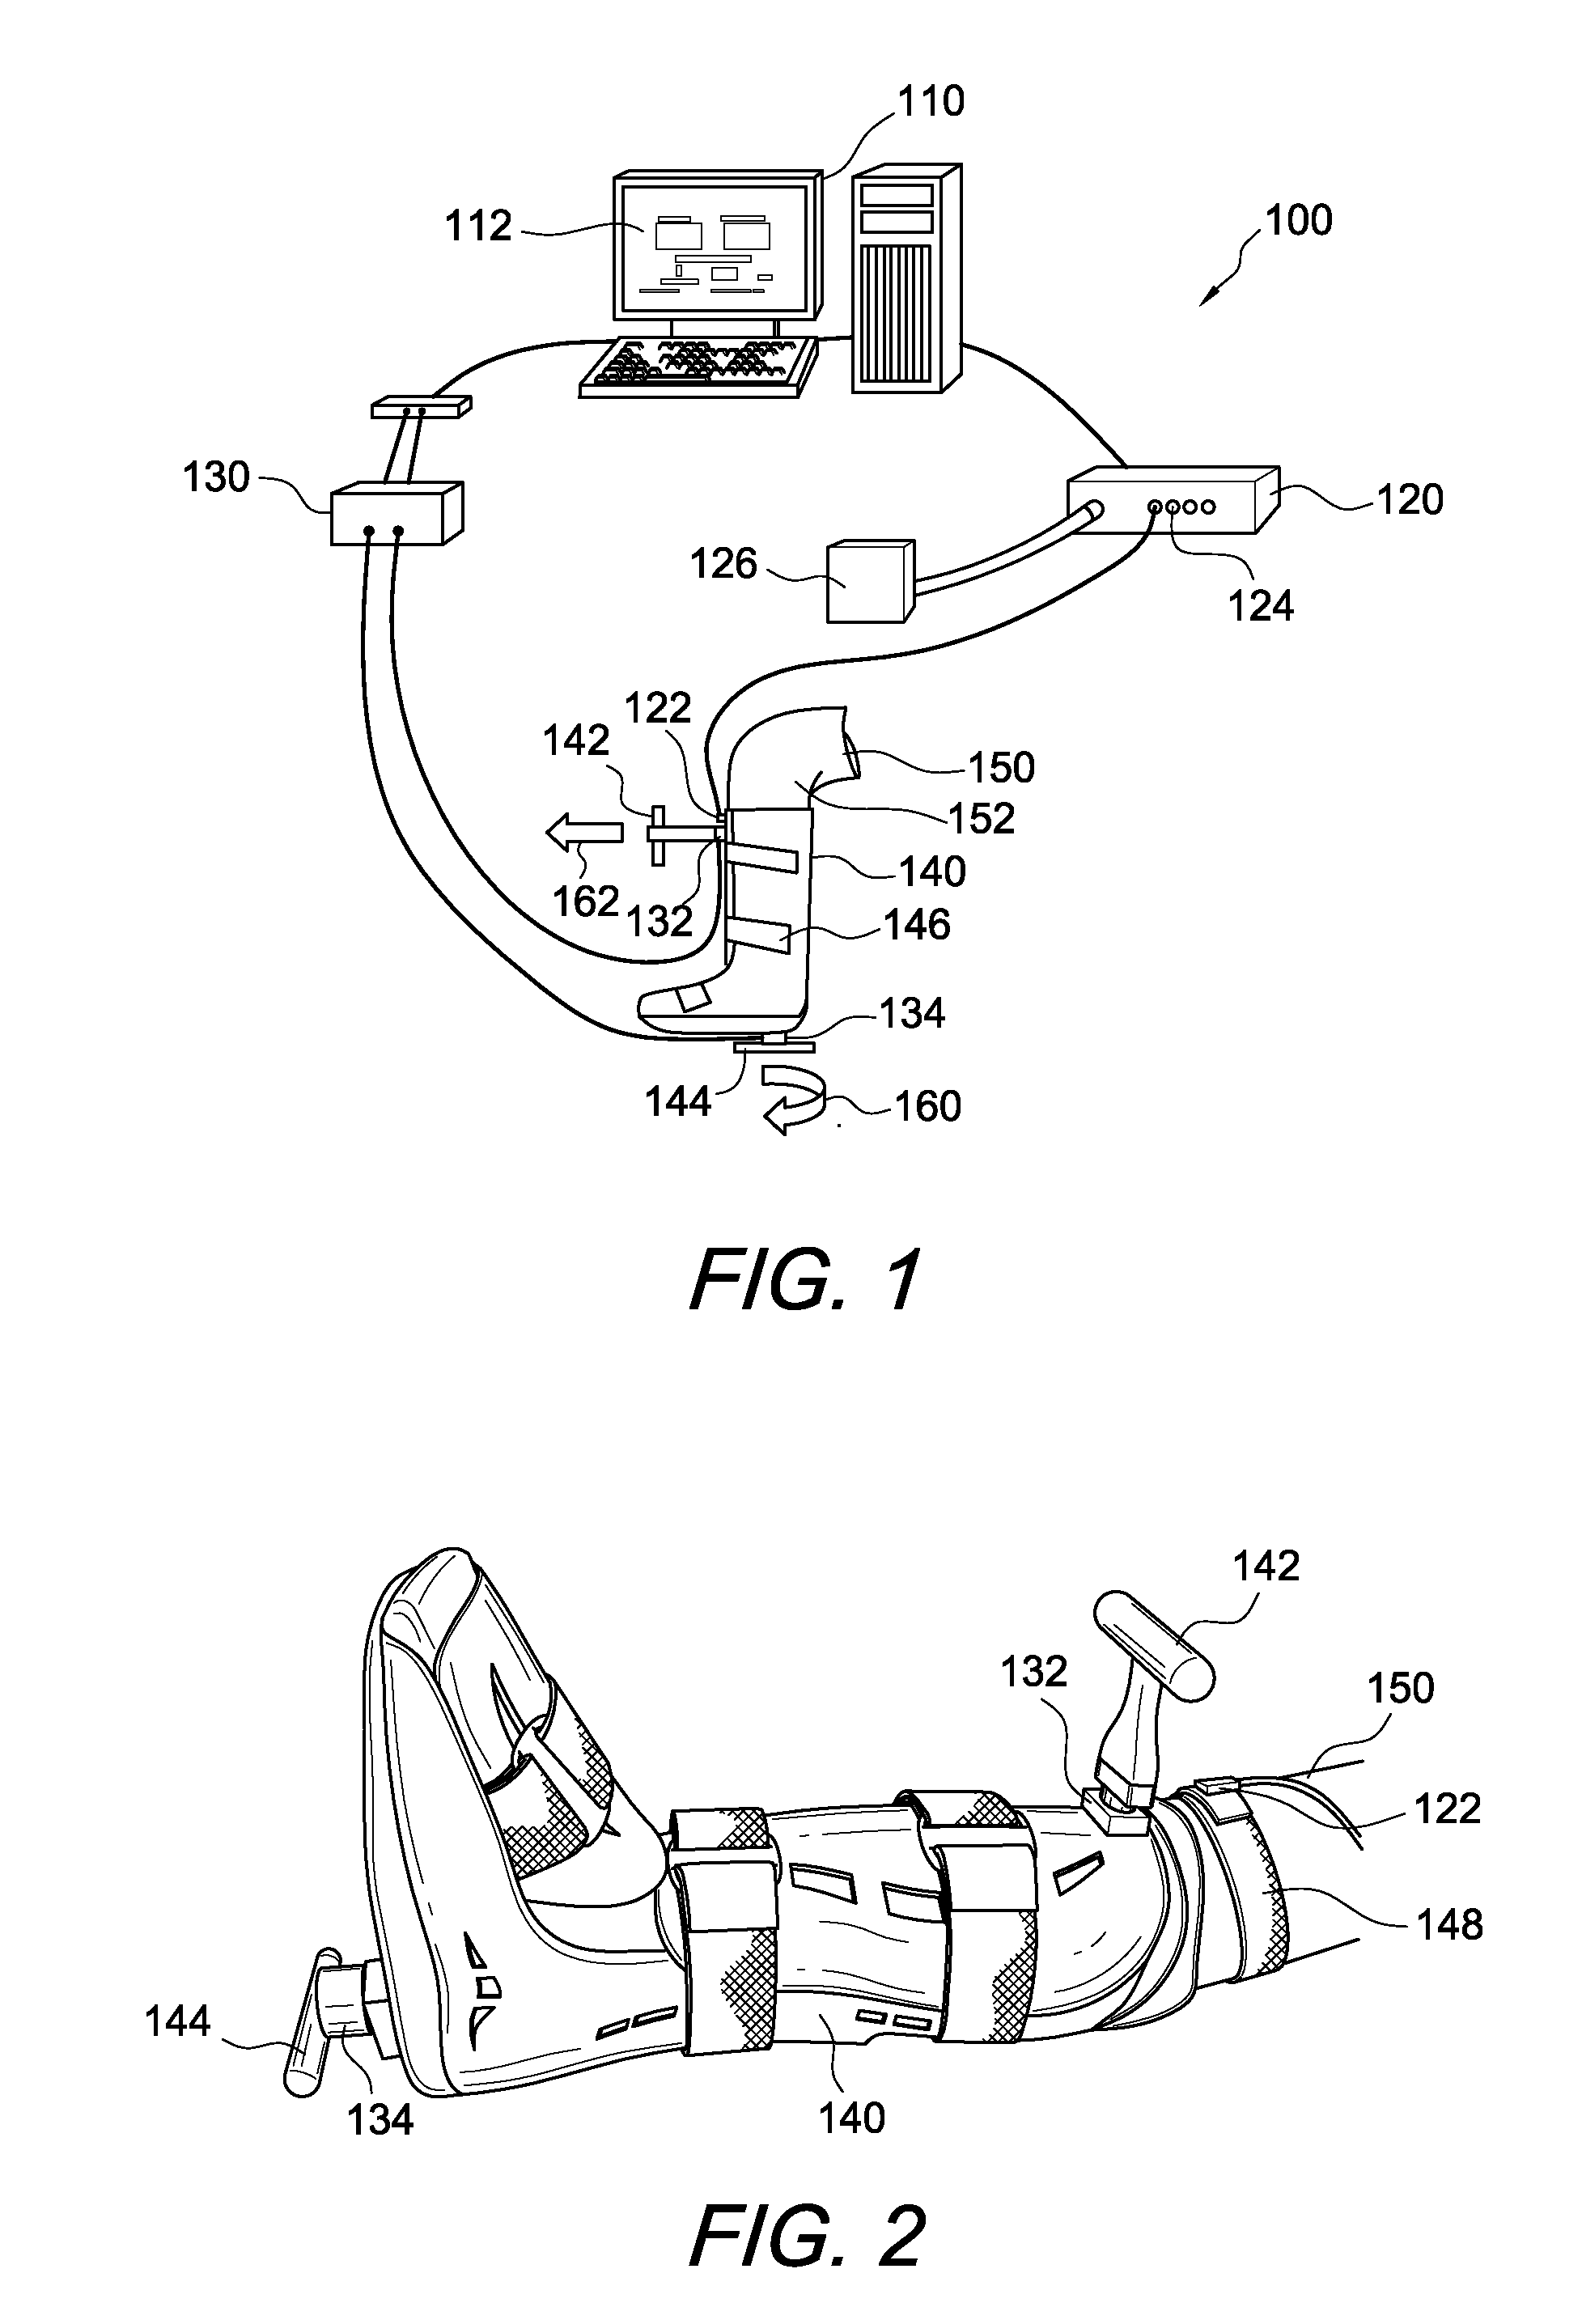 Knee ligament testing device for measuring drawer and rotational laxity